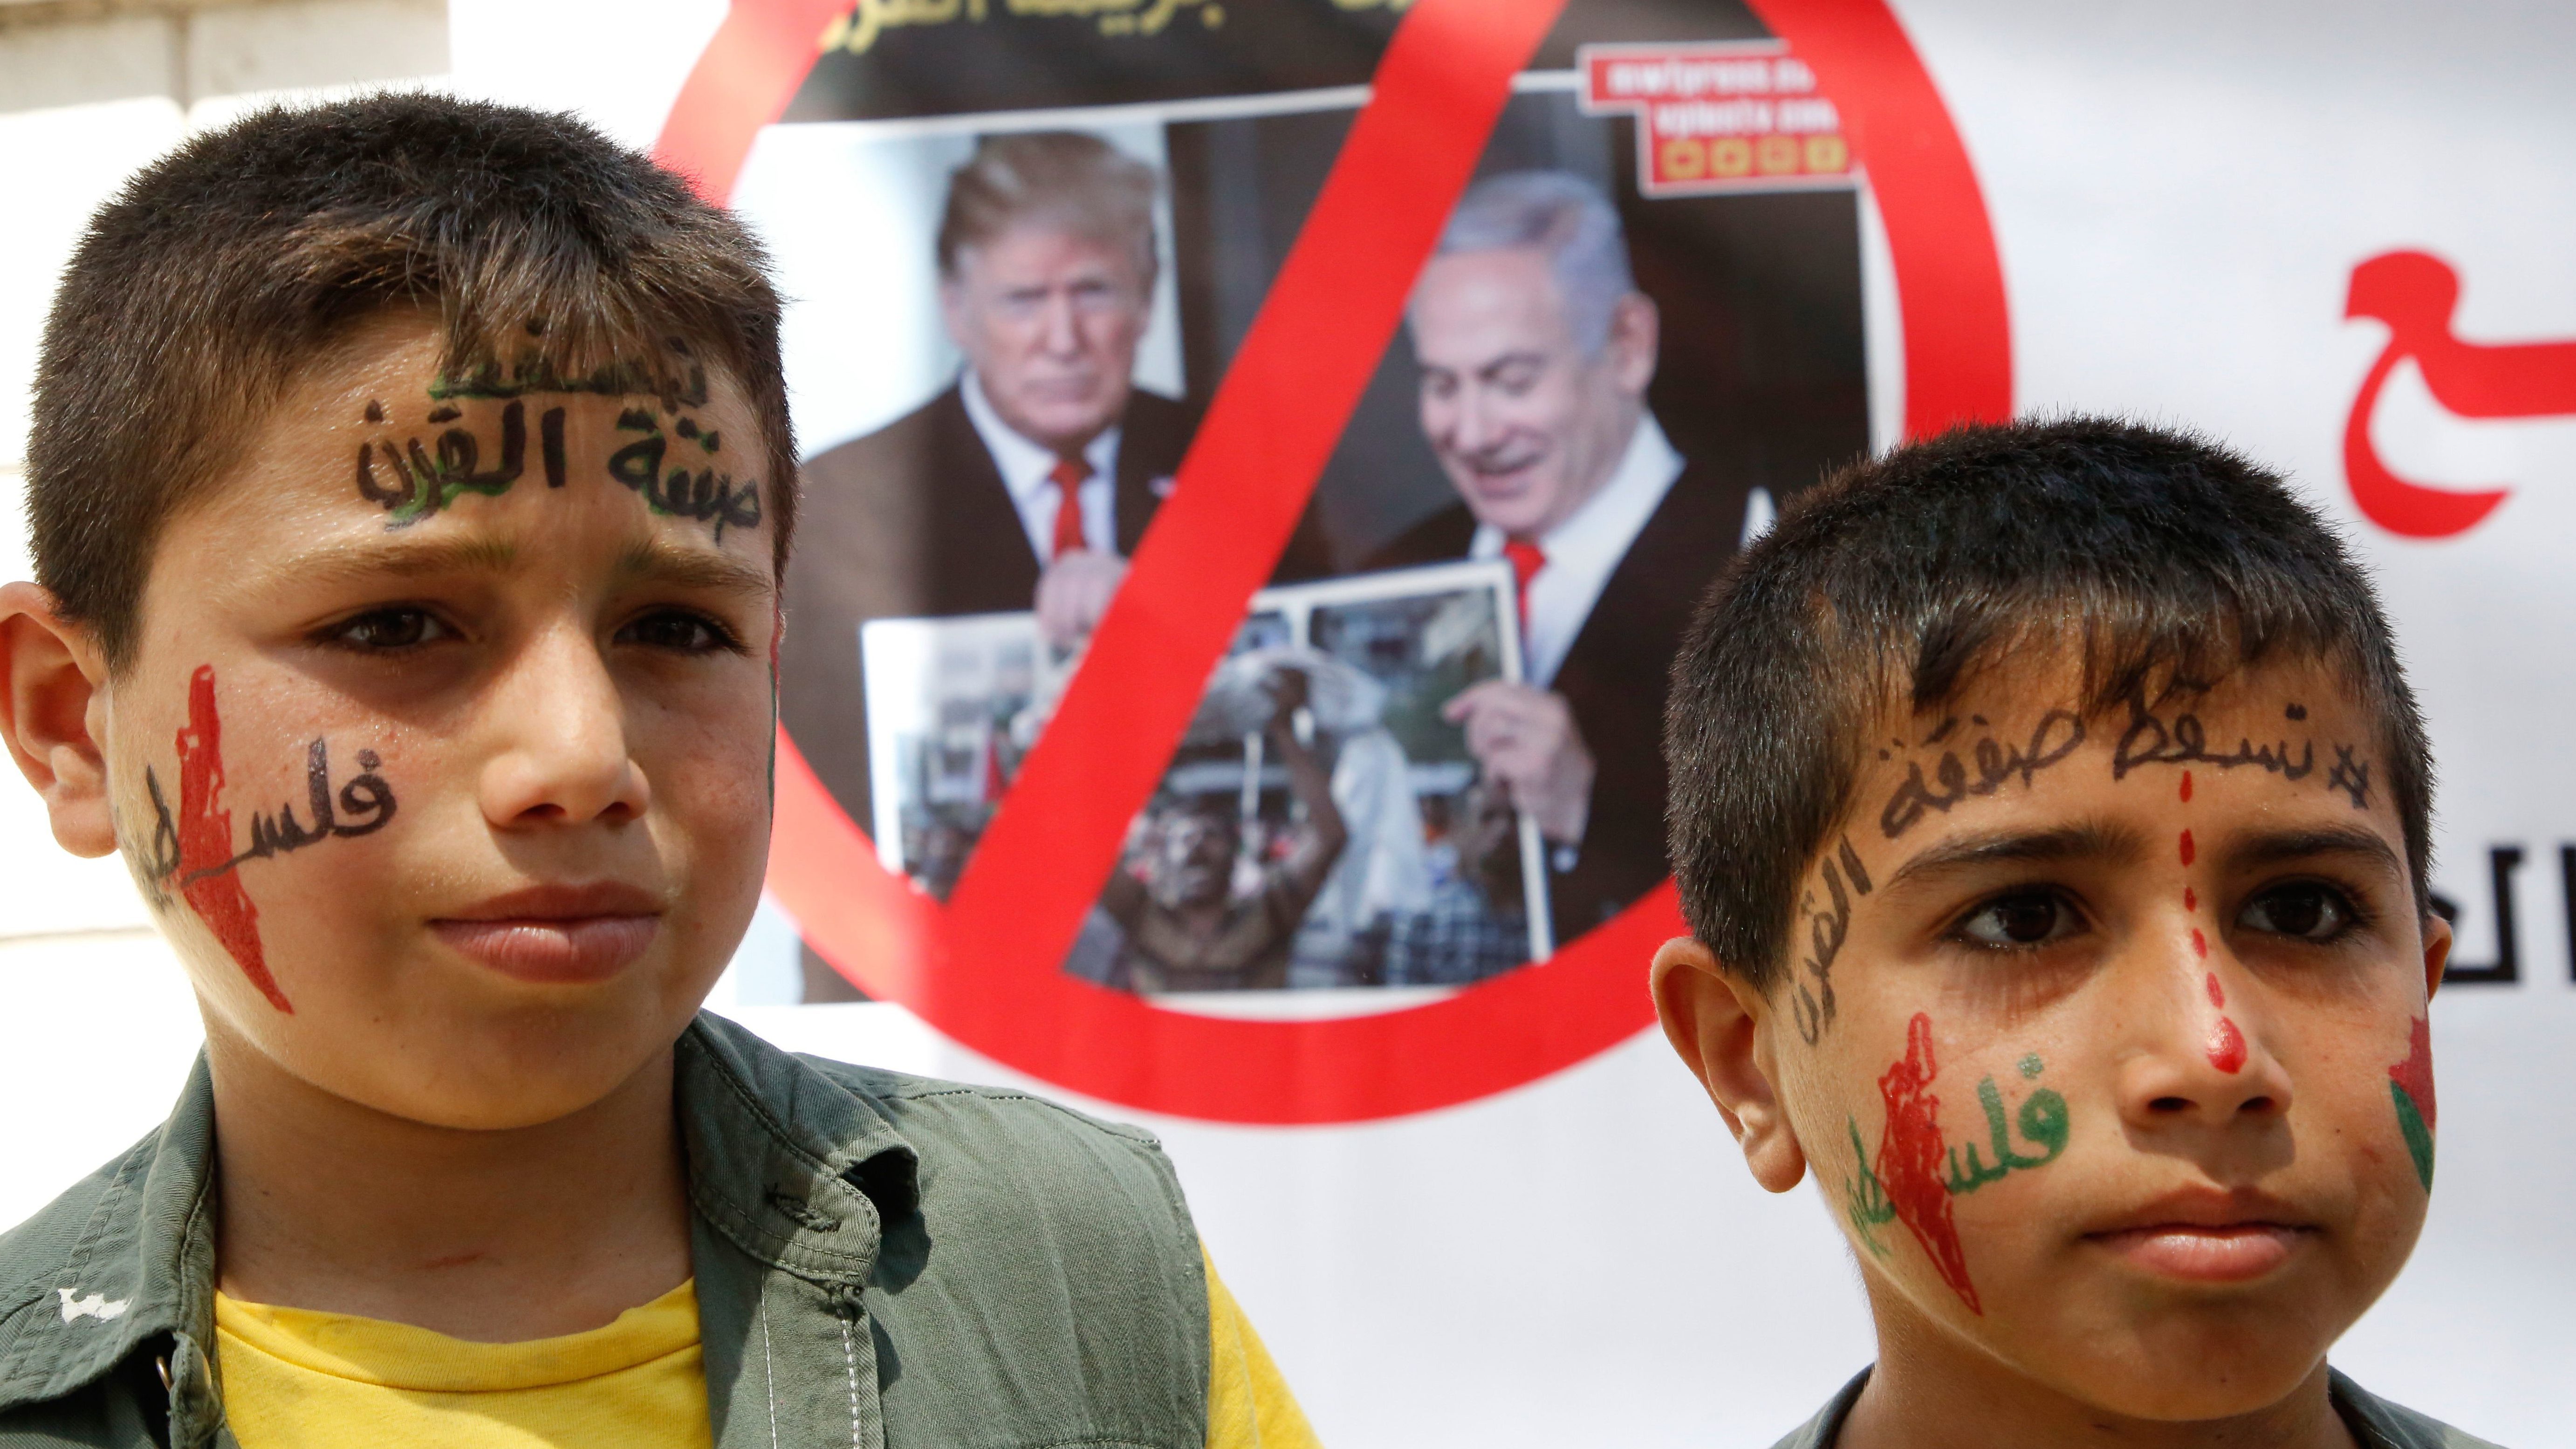 Toward a Contemporary Discourse on the Palestinian Cause